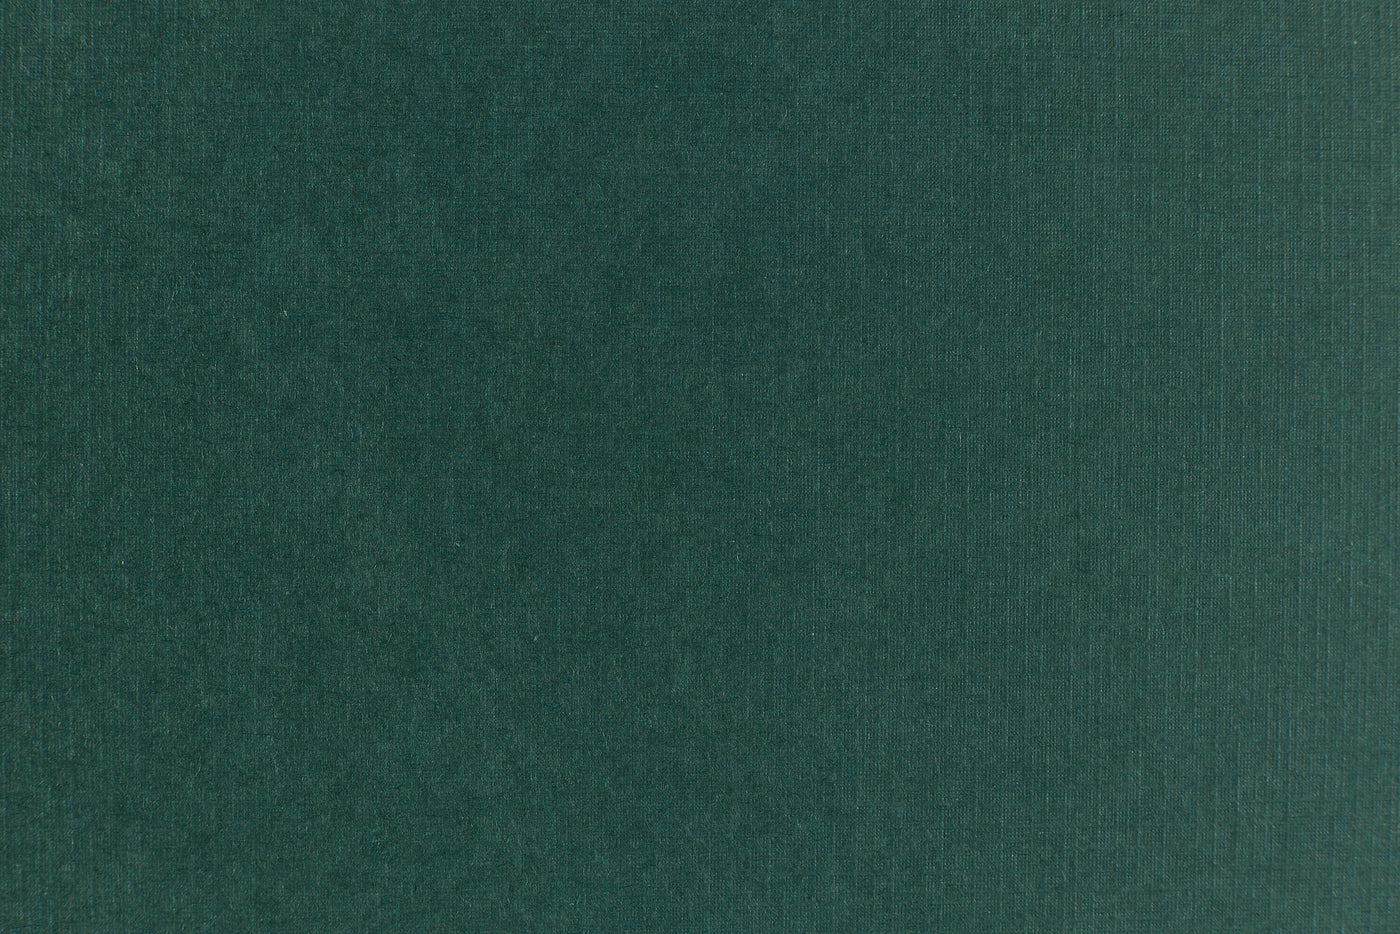 Evergreen Cardstock, Linen Pattern (Royaltone, Cover Weight)